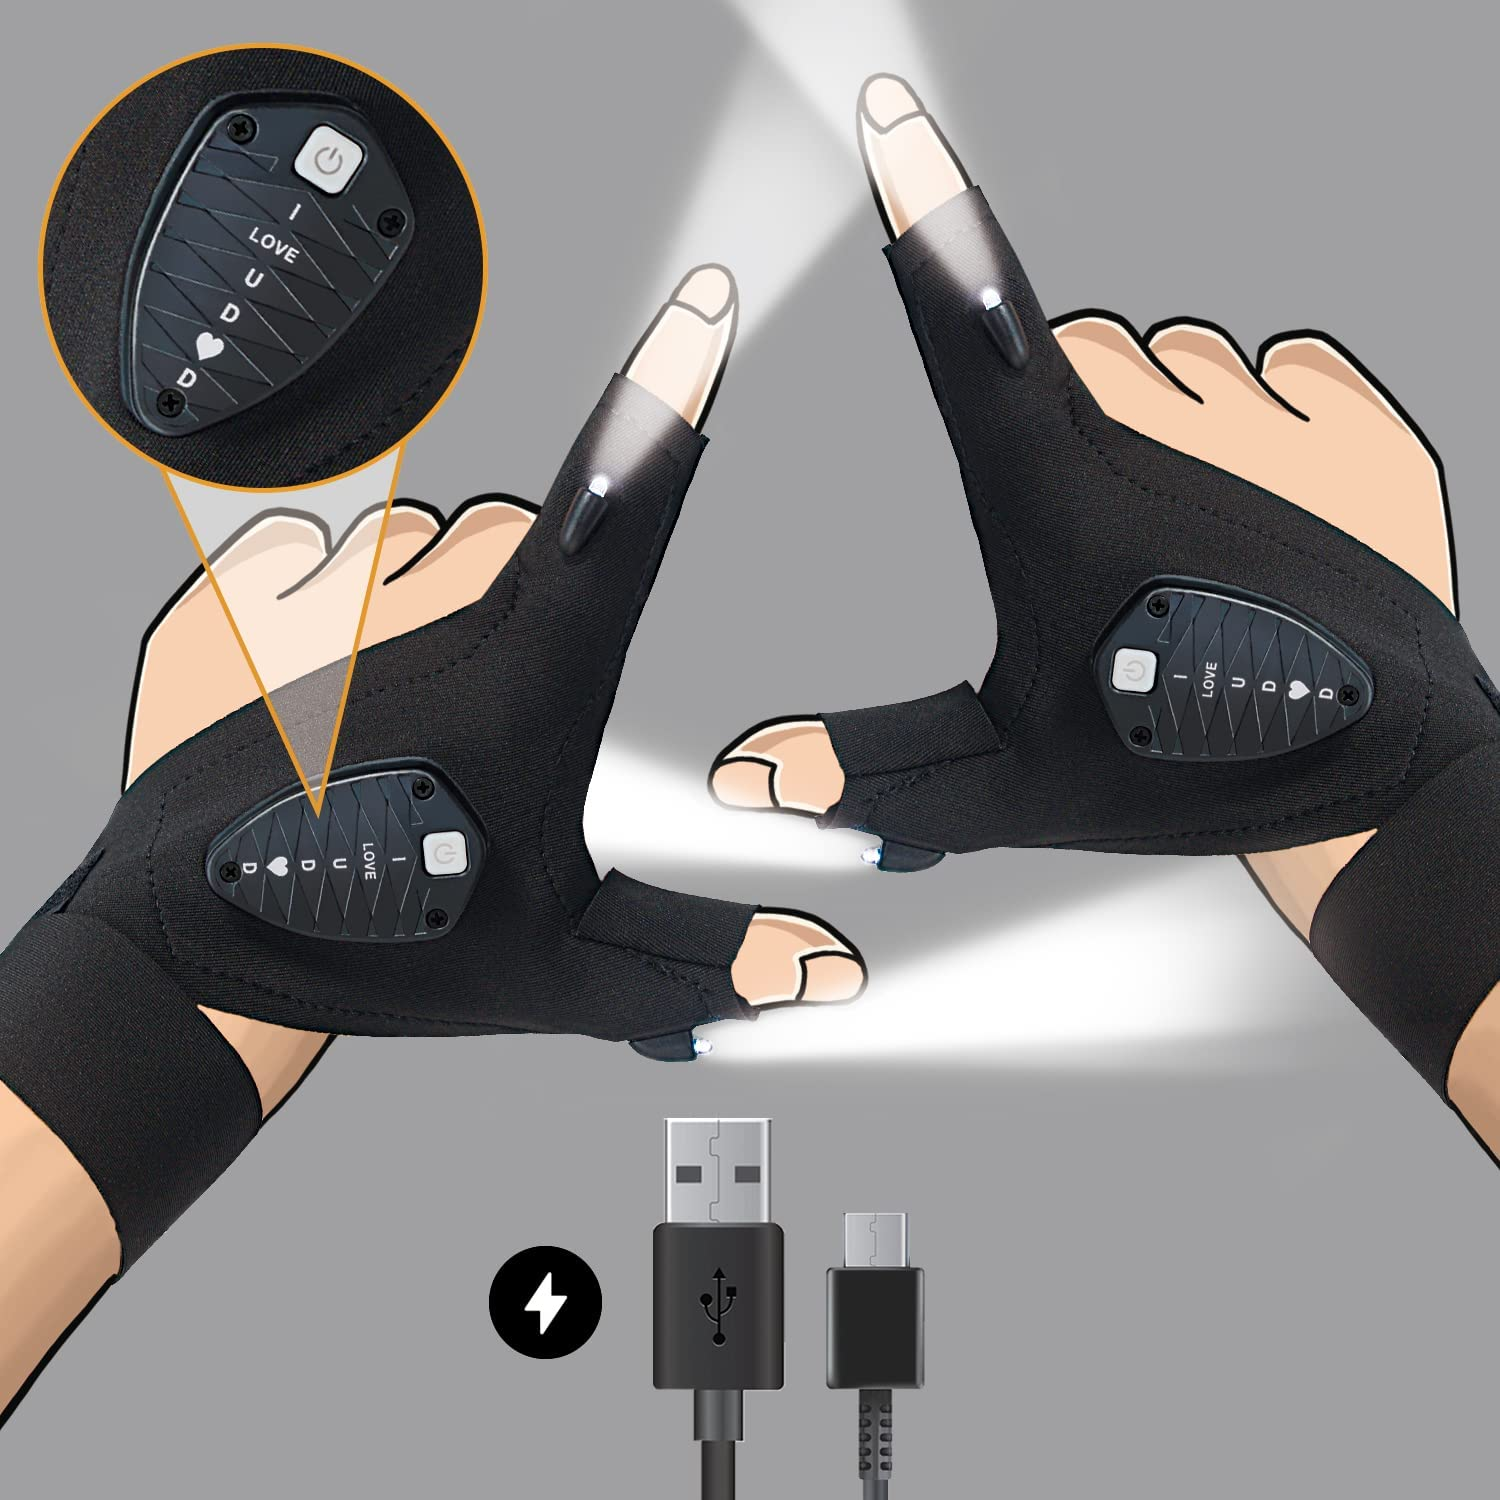 Rechargeable LED Flashlight Gloves